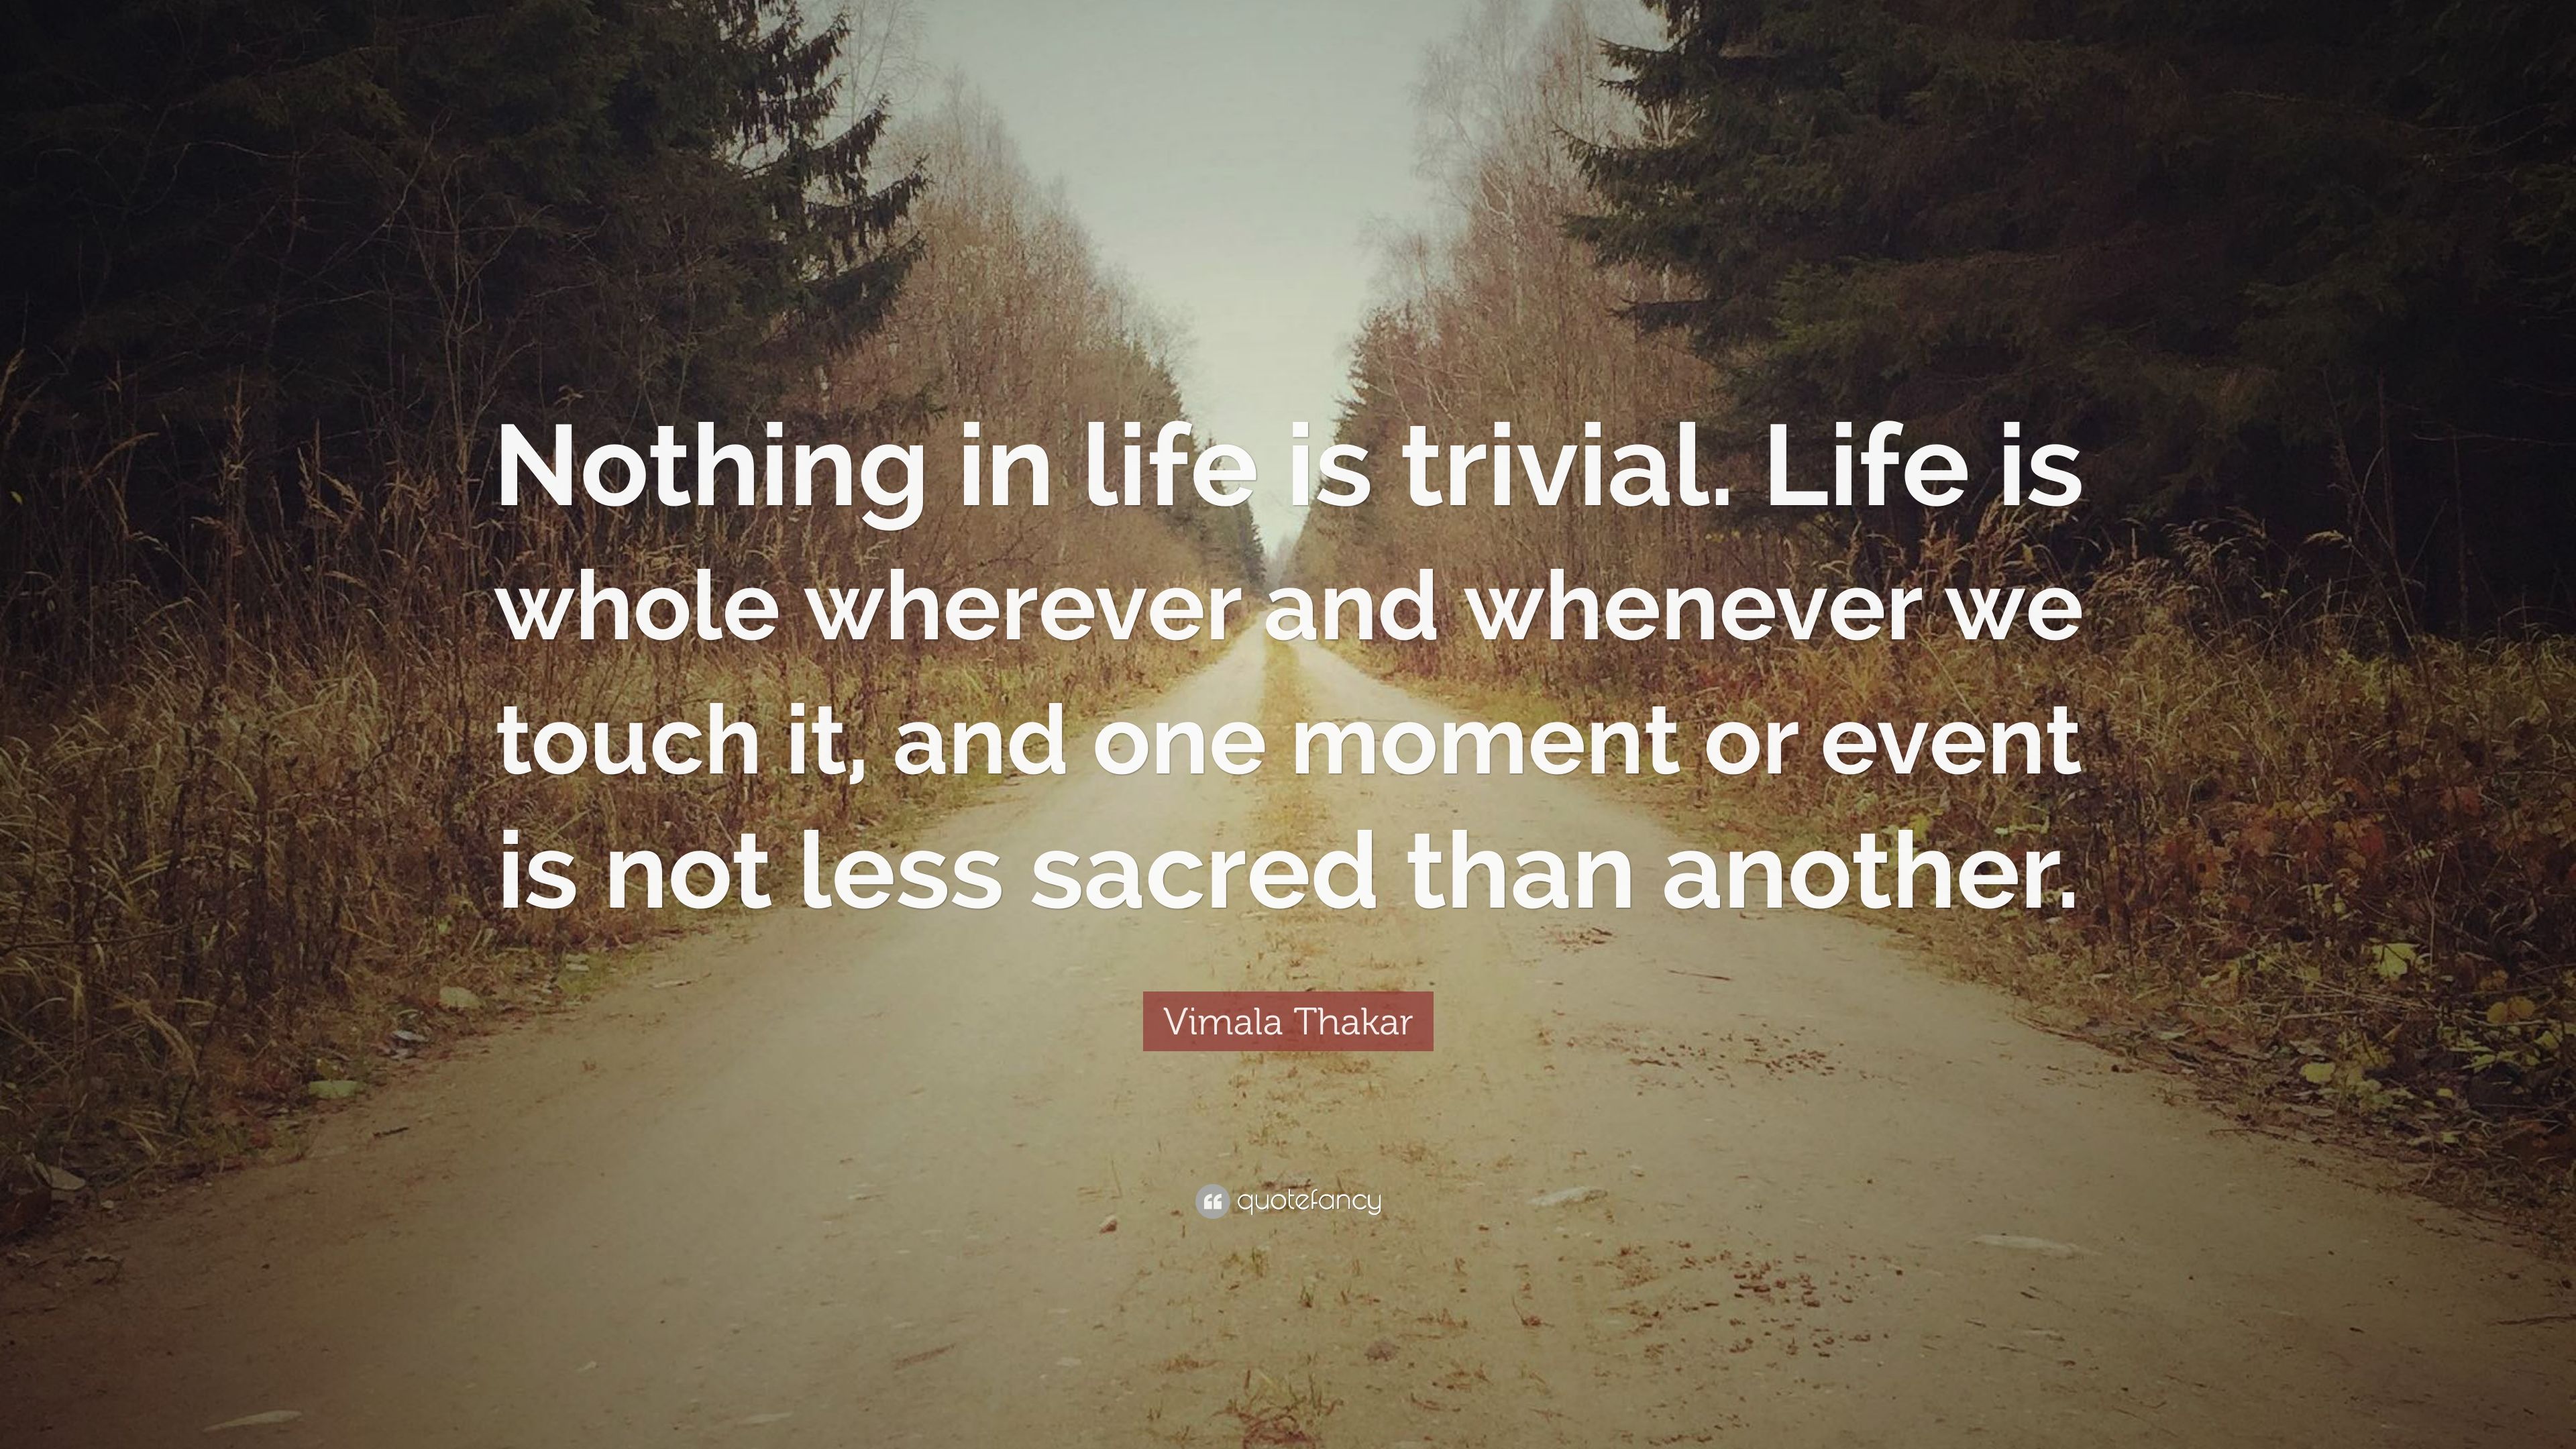 Vimala Thakar Quote: “Nothing in life is trivial. Life is whole ...